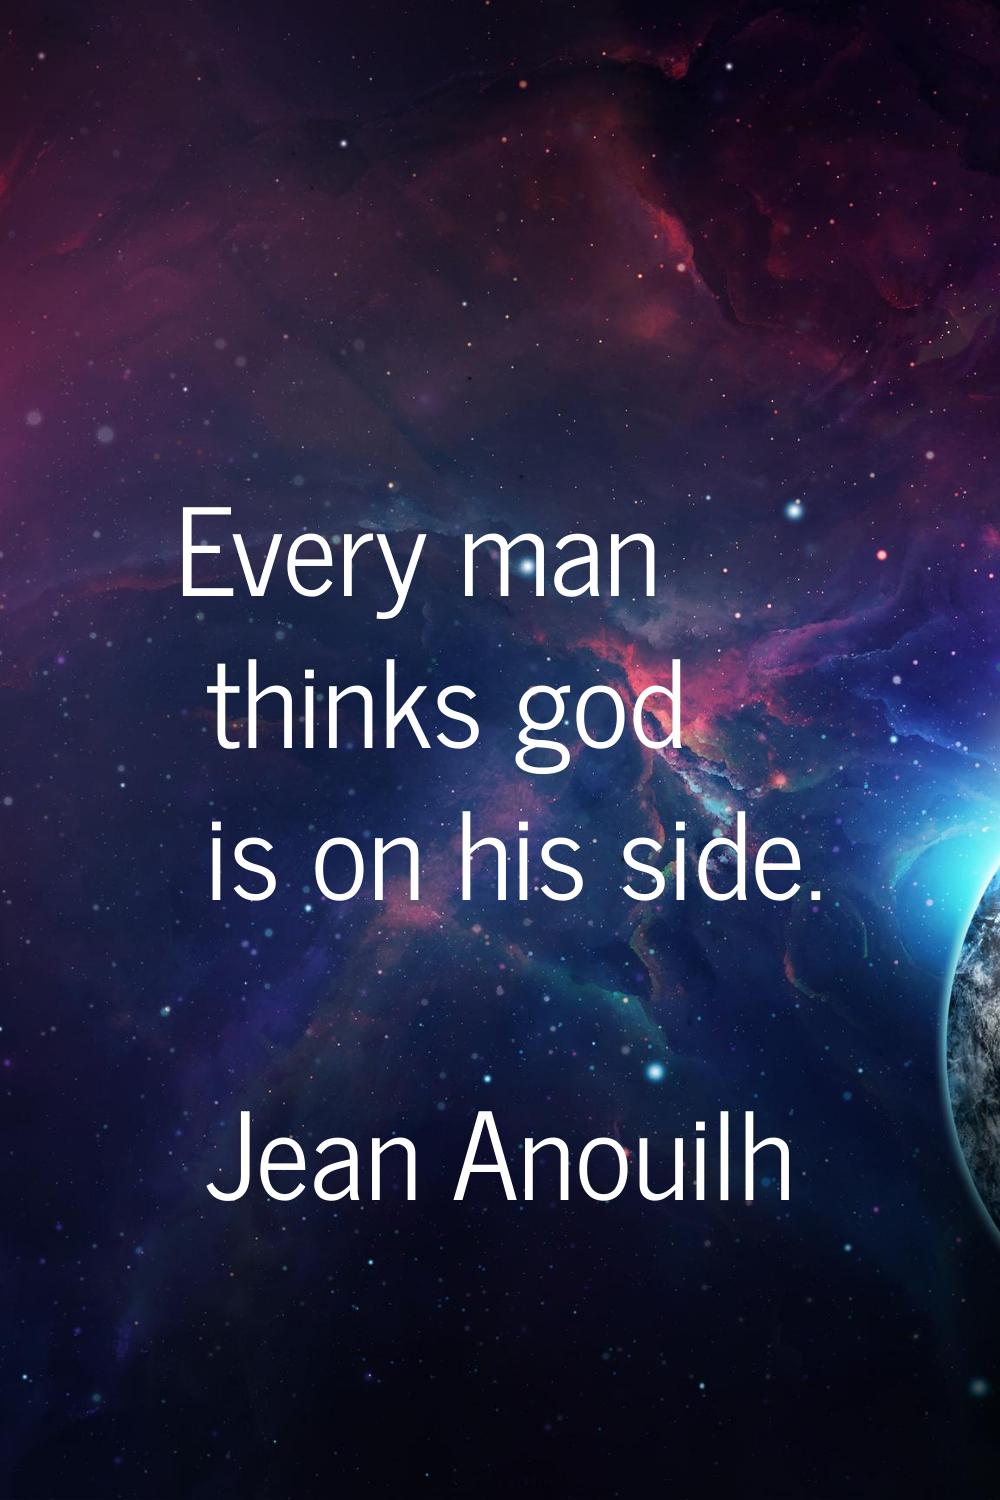 Every man thinks god is on his side.